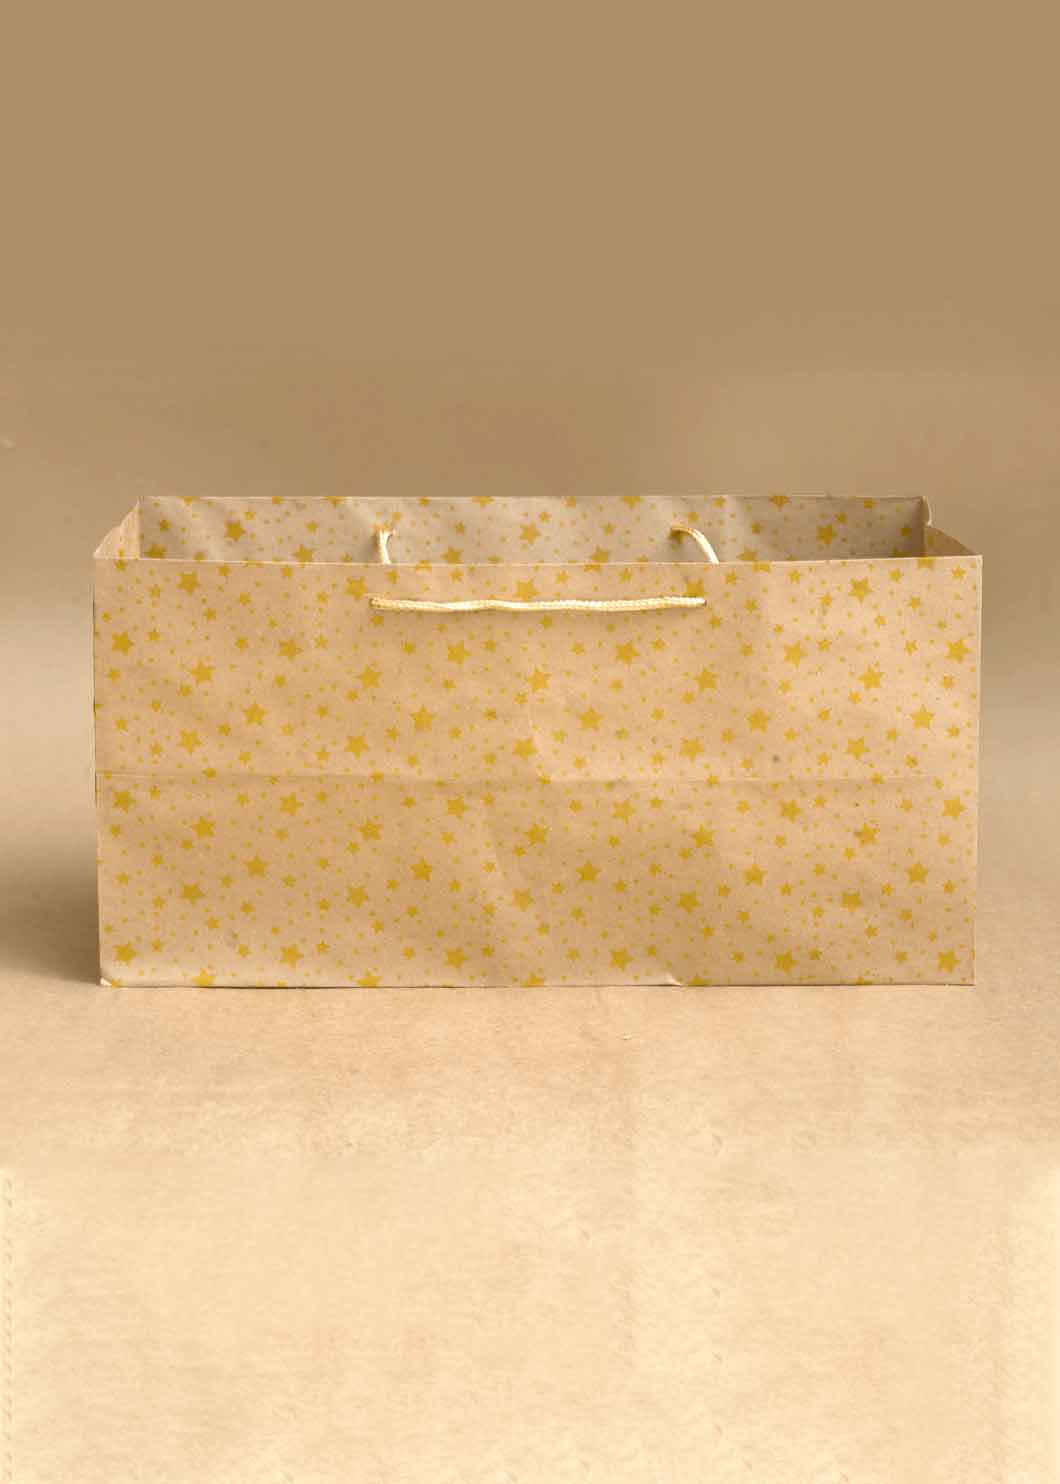 Craft Paper Bag Star Pattern - Craft Paper Bag - Yellow Silver Red - 14x7 Square Paper Bag